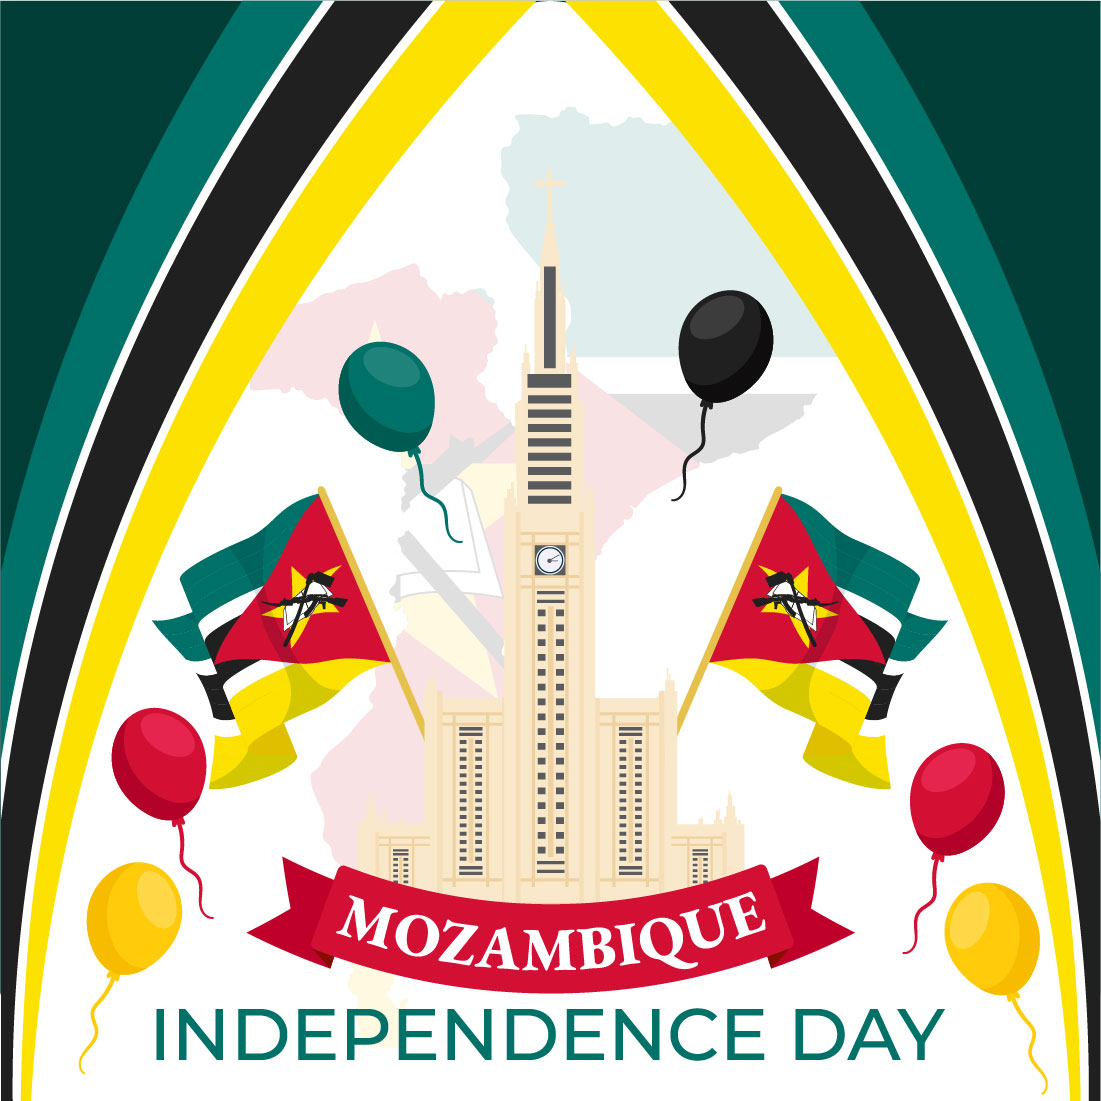 12 Mozambique Independence Day Illustration preview image.